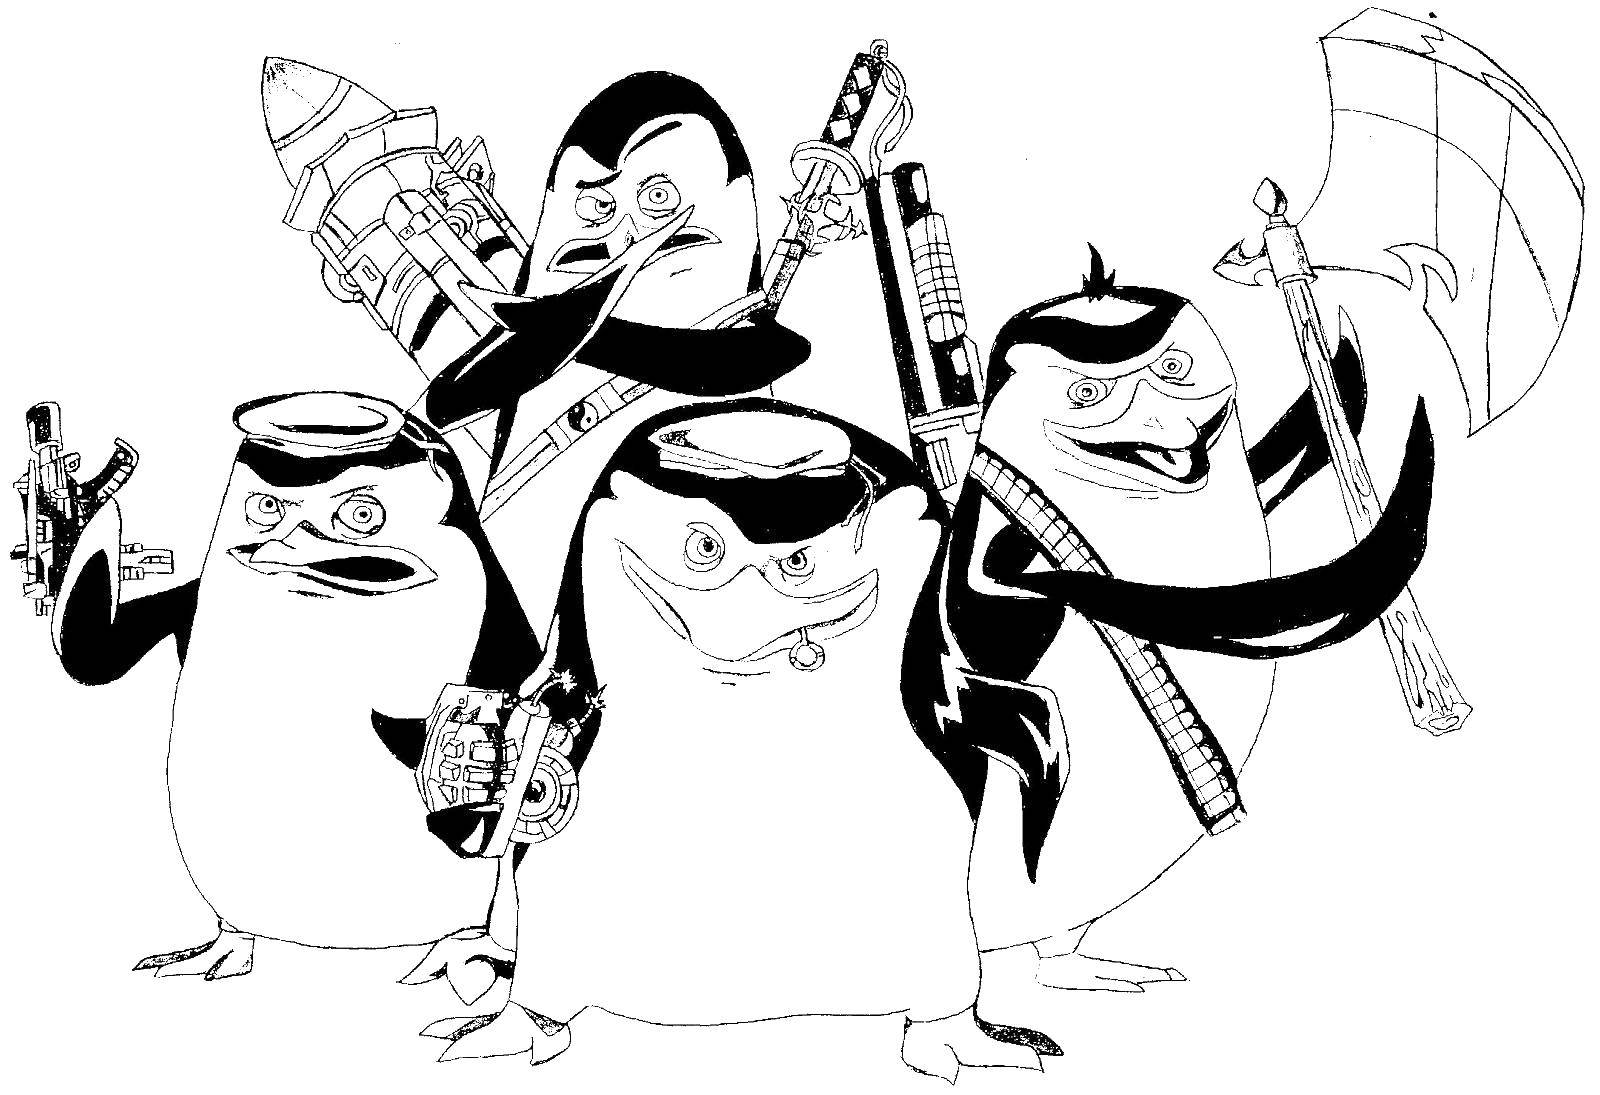 Coloring The penguins of Madagascar. Category Madagascar. Tags:  Madagascar, Alex, the penguins.